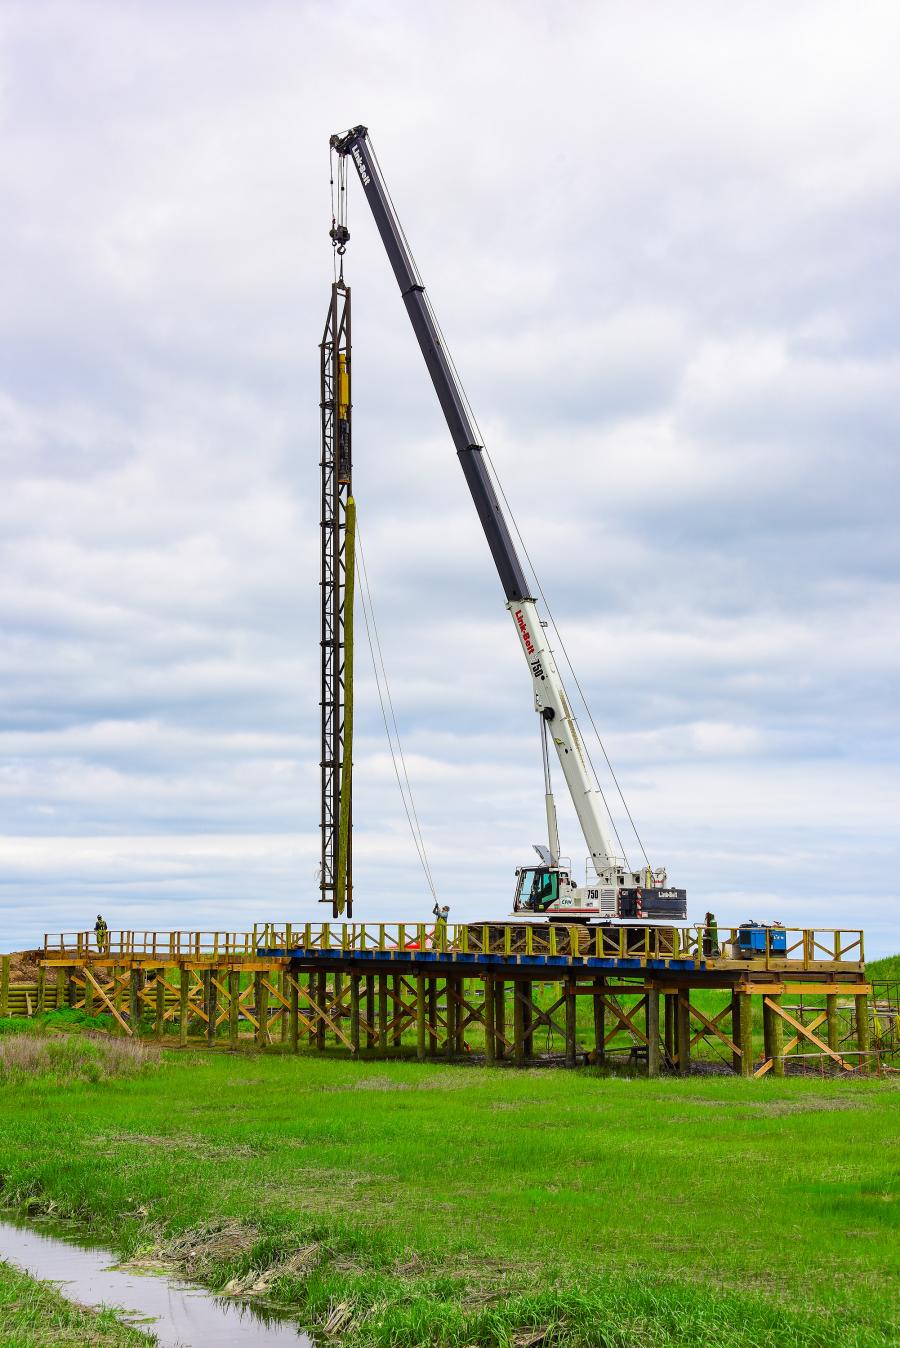 In order to build a 10 ft. (3.04 m) high, elevated trestle BAC, Inc. rented a 75-ton (70-mt) Link-Belt TCC-750 telescopic crawler crane from Wood’s CRW Corp.